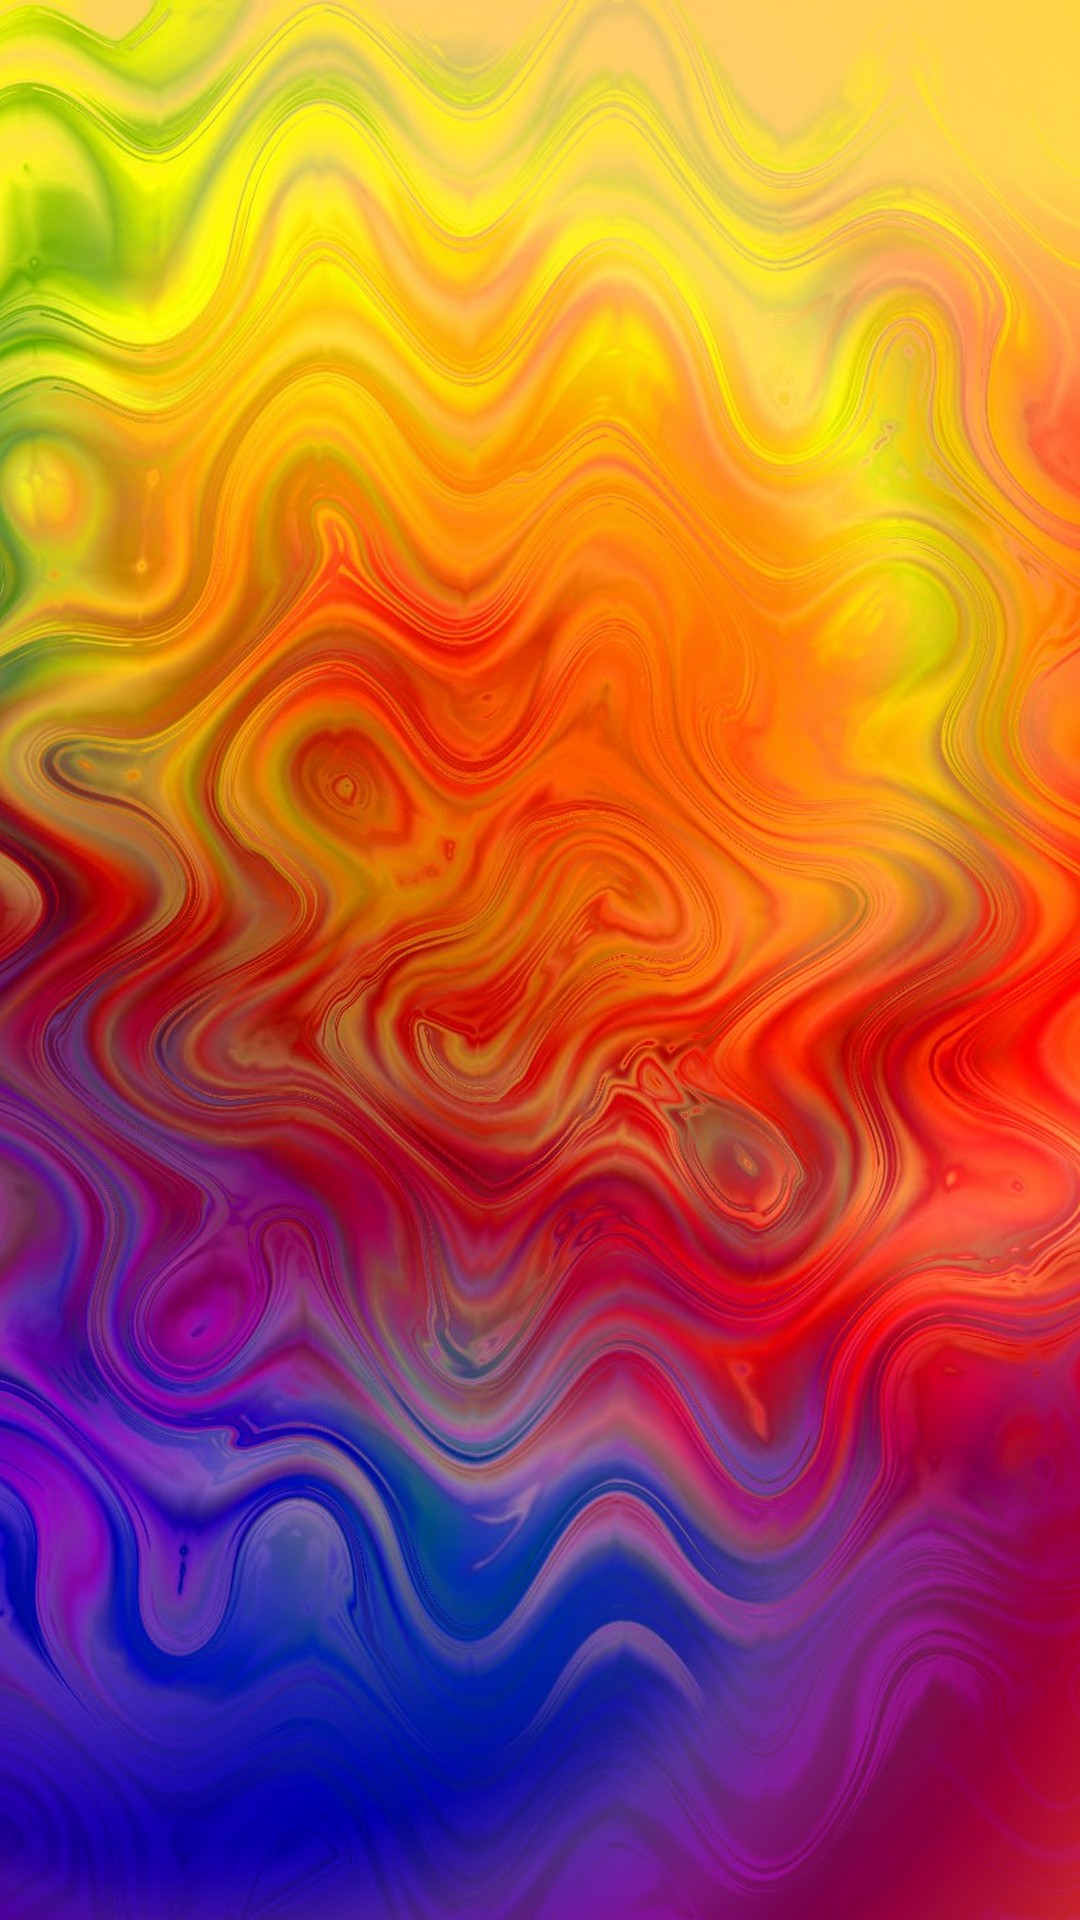 Psychedelic Art Wallpaper For iPhone resolution 1080x1920